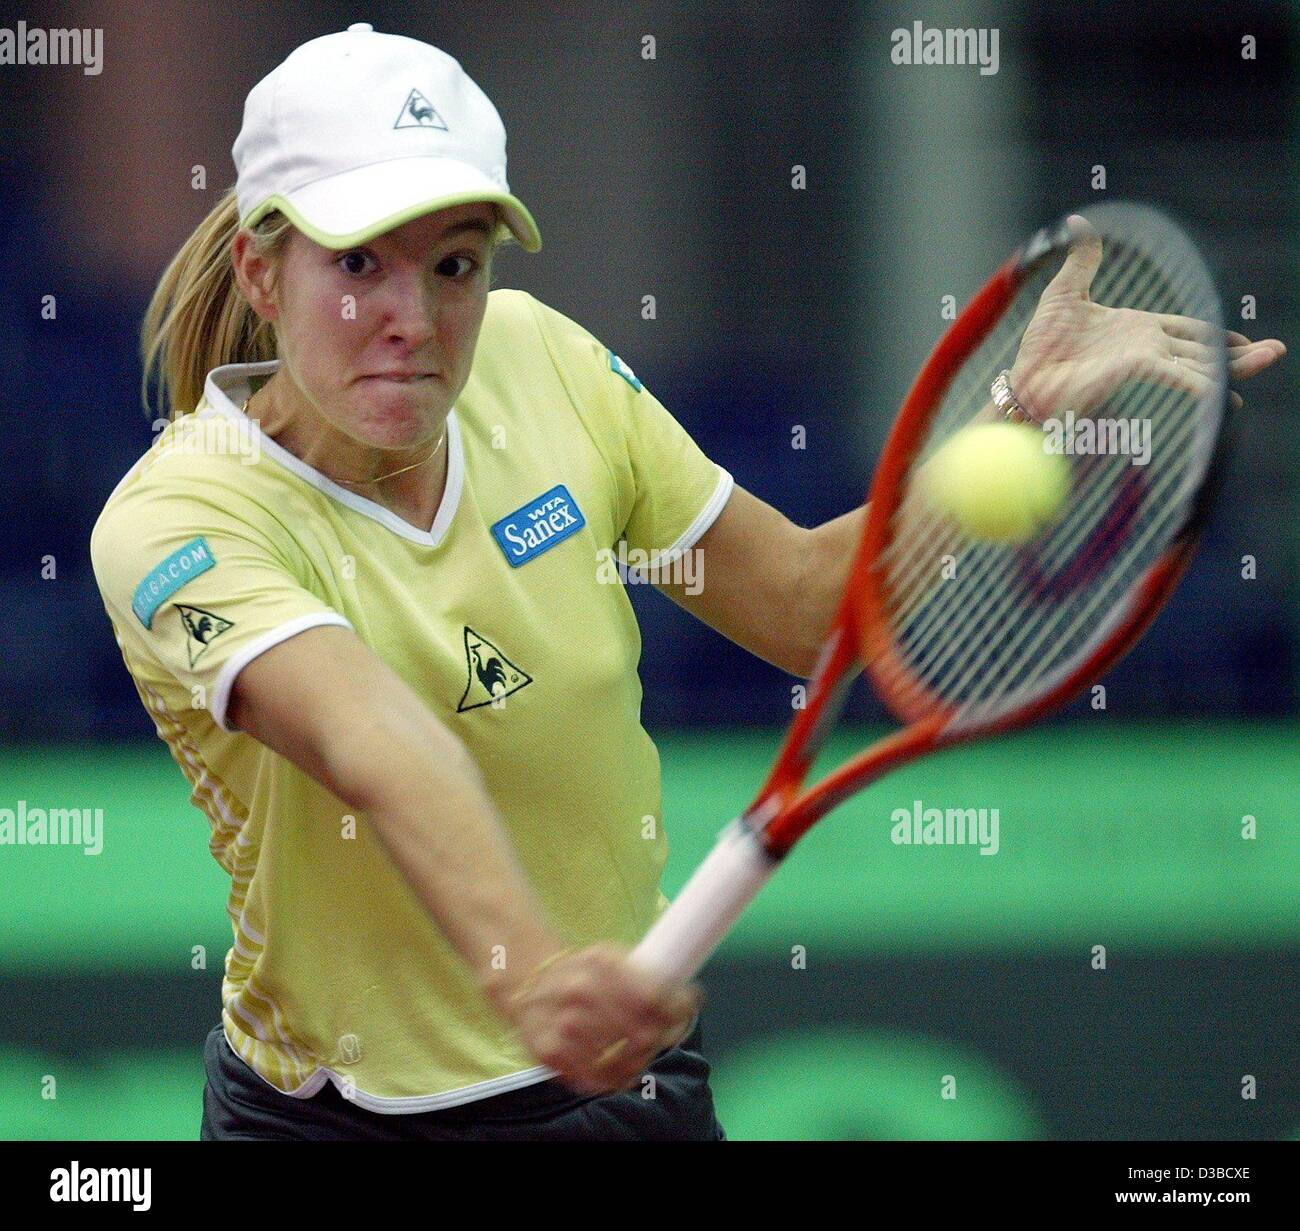 (dpa) - Belgium's Justine Henin plays a backhand during the eighth final match of the 13th International Sparkassen Cup WTA Tournament in Leipzig, Germany, 25 September 2002. Stock Photo